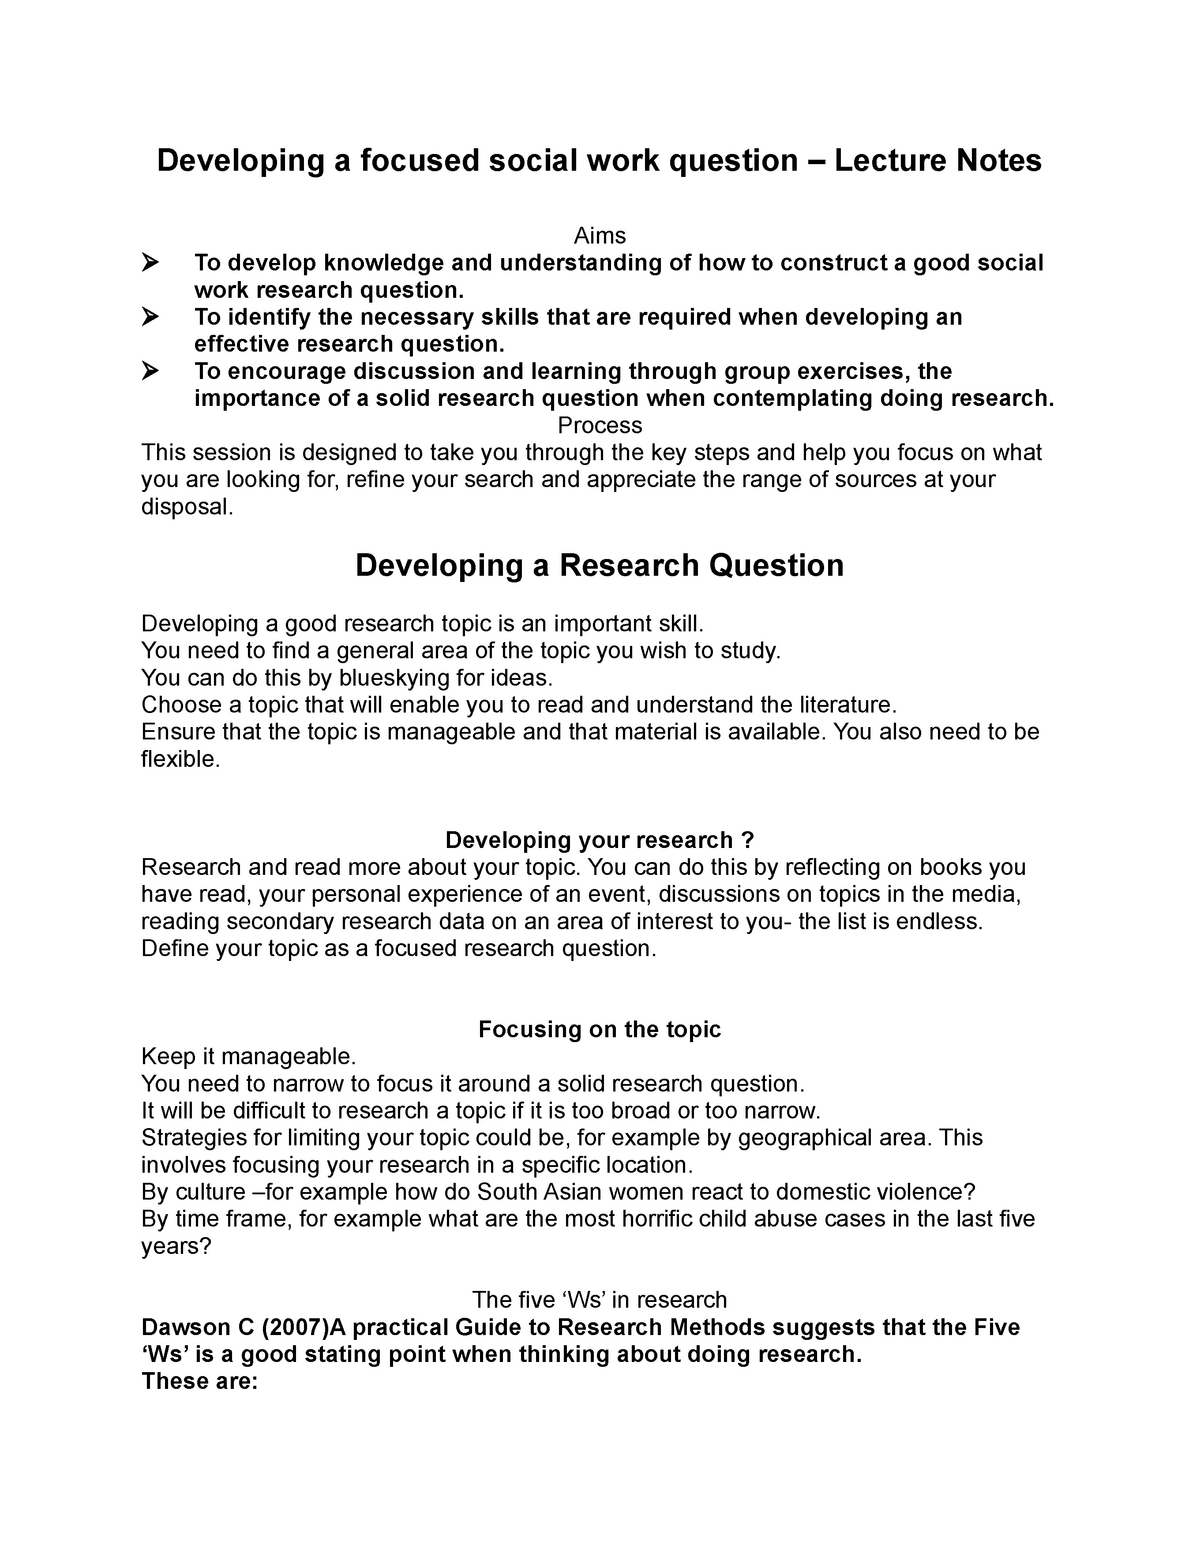 write a research question based on a social science perspective